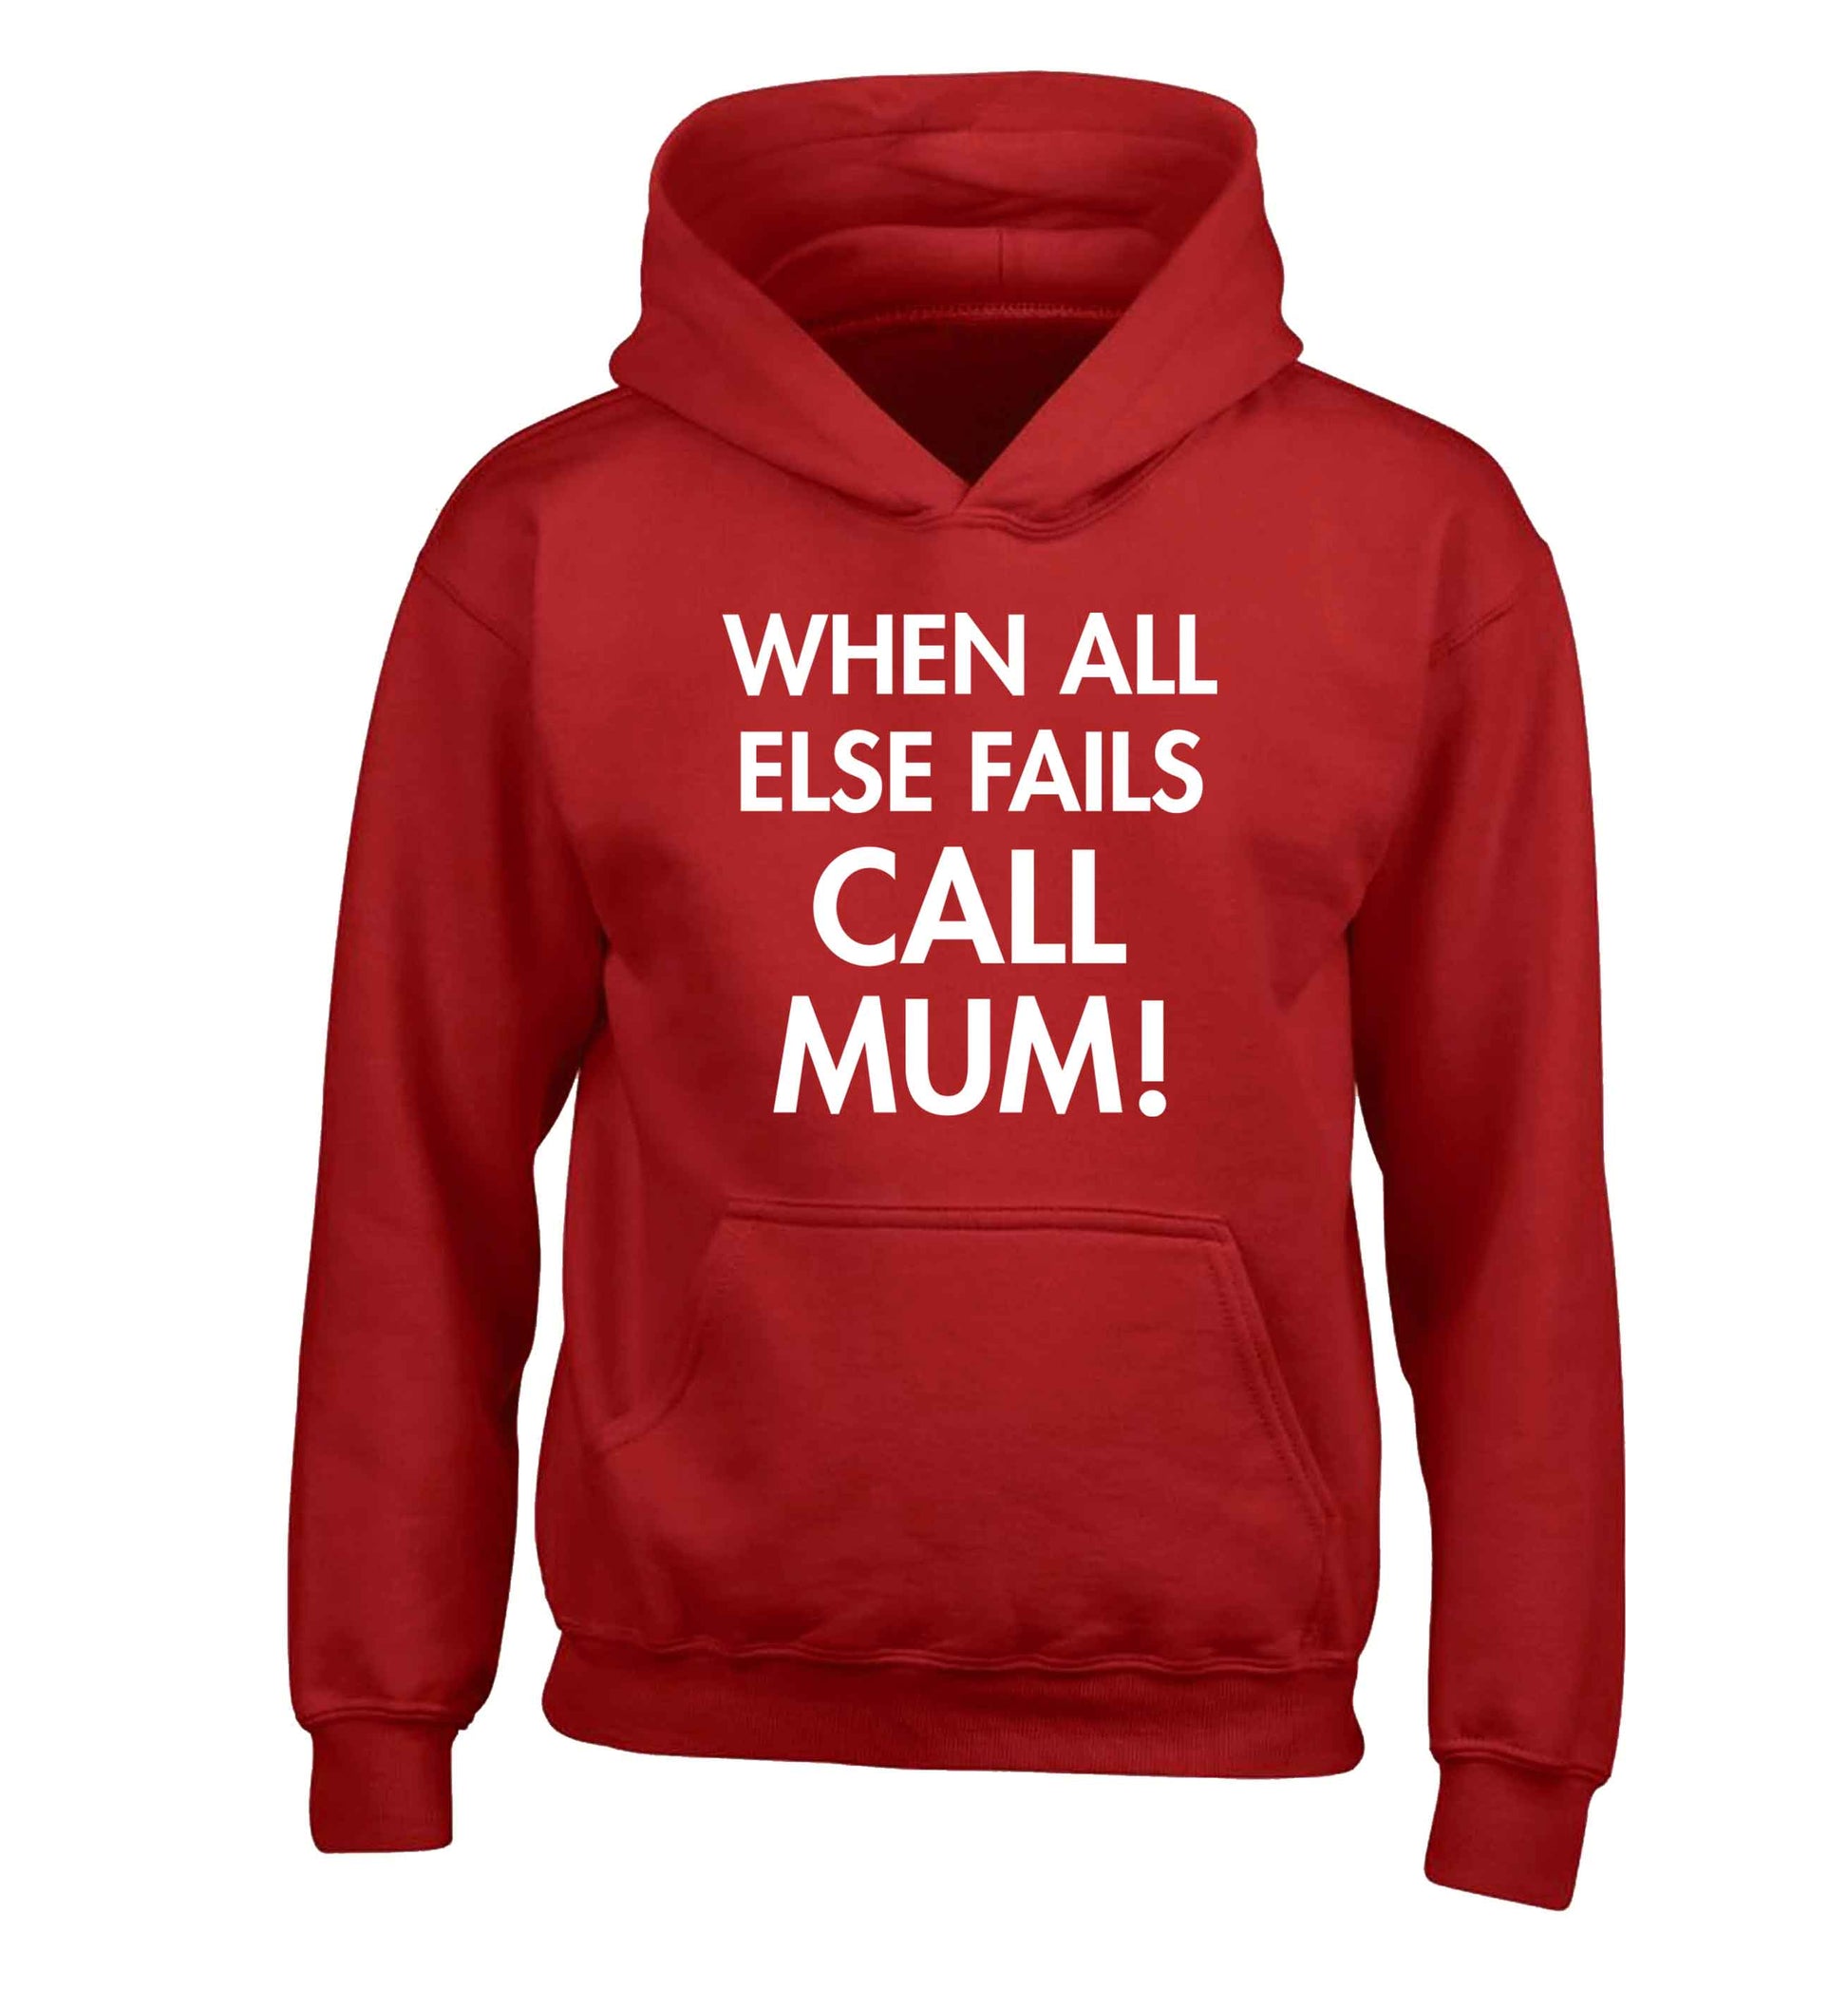 When all else fails call mum! children's red hoodie 12-13 Years